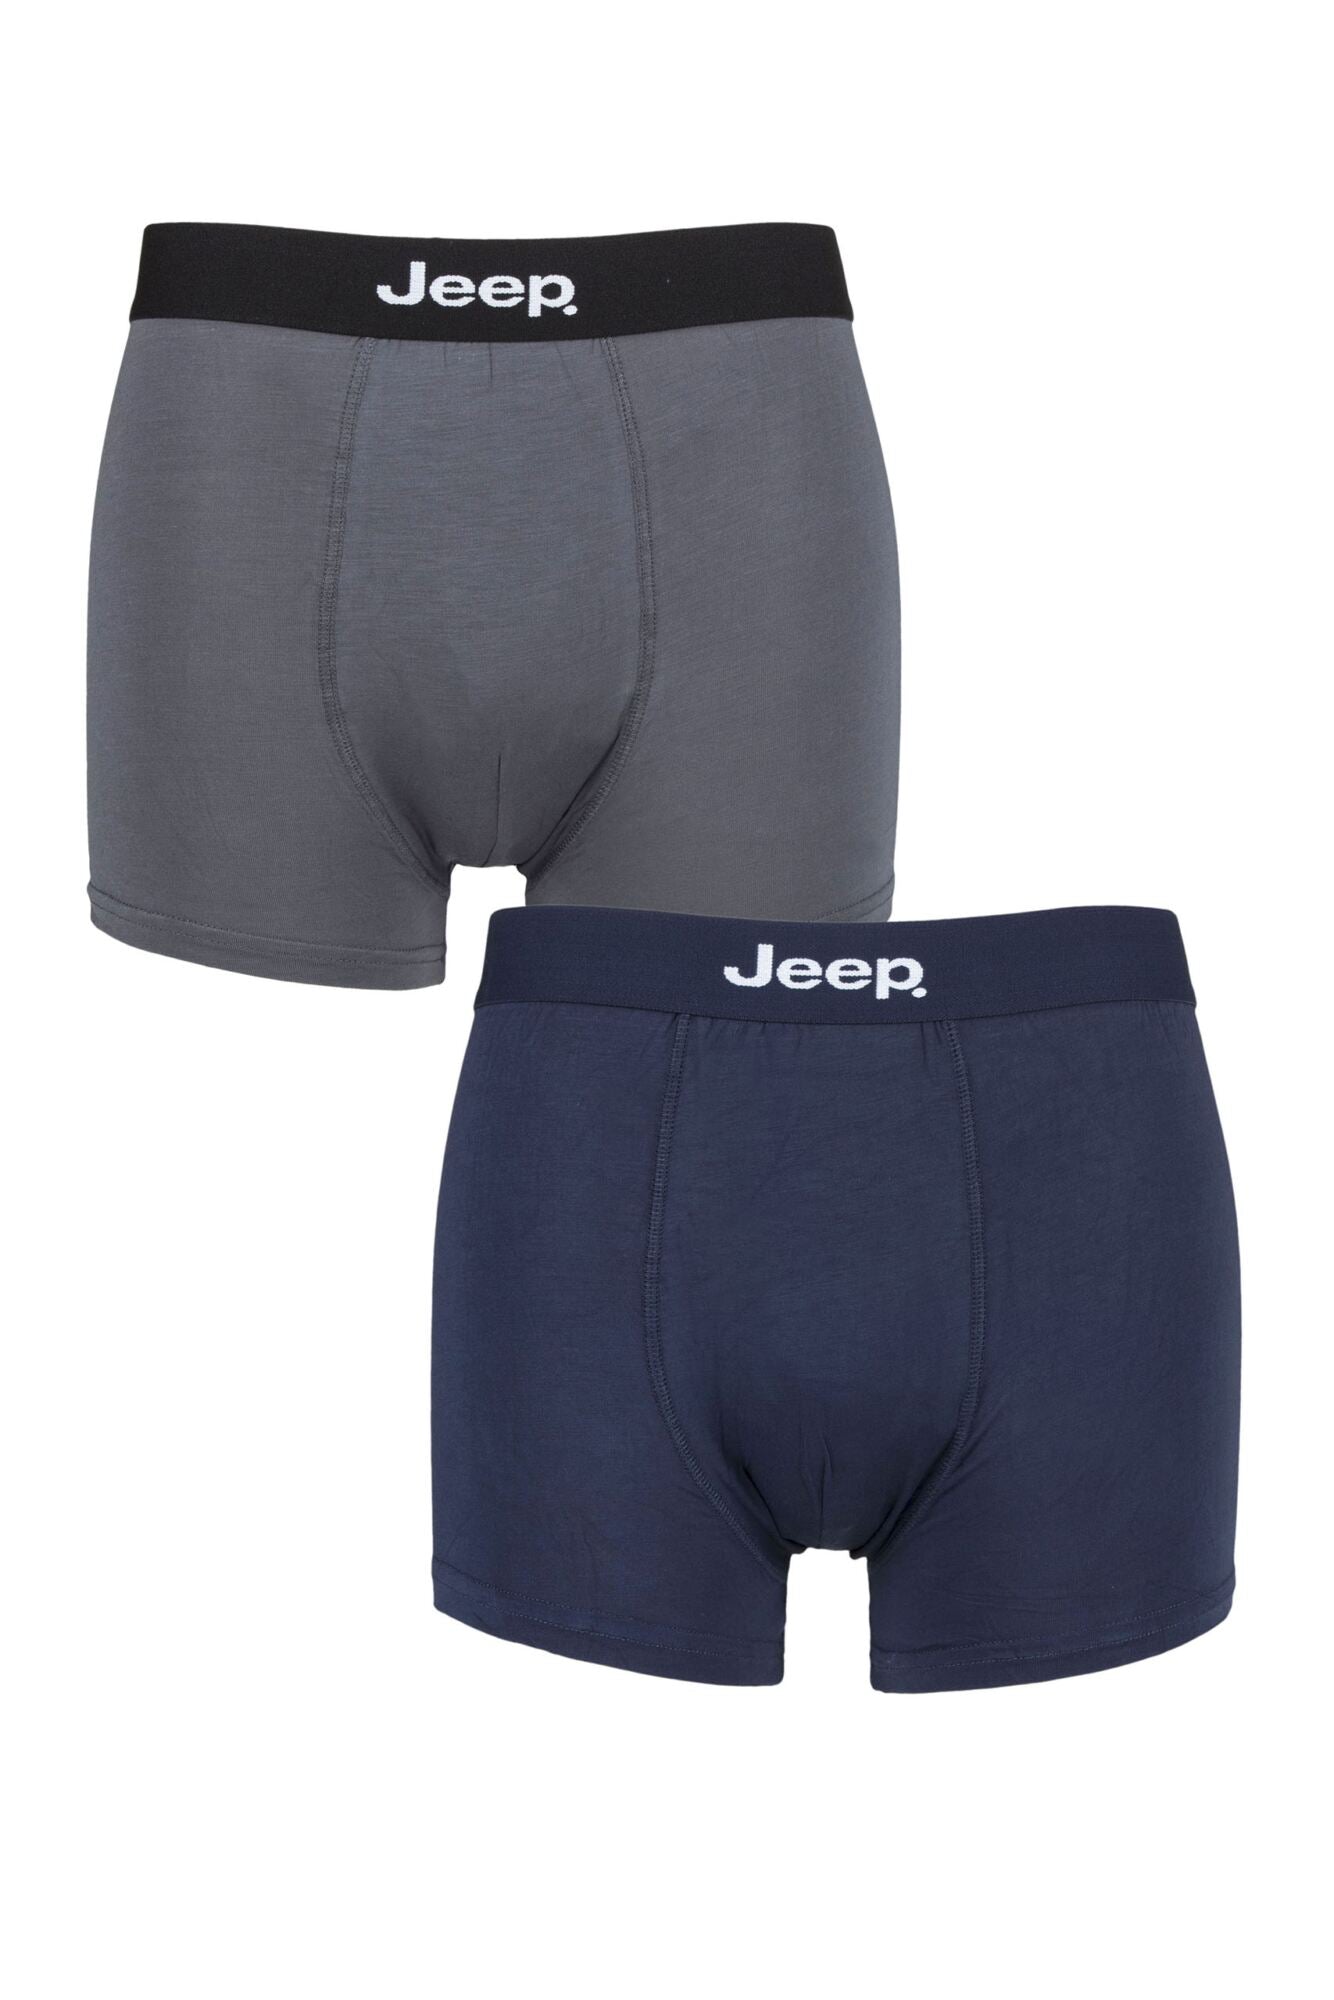 Jeep-Mens Underwear-Fitted Bamboo Trunks-2 Pair Pack-JM891-Navy